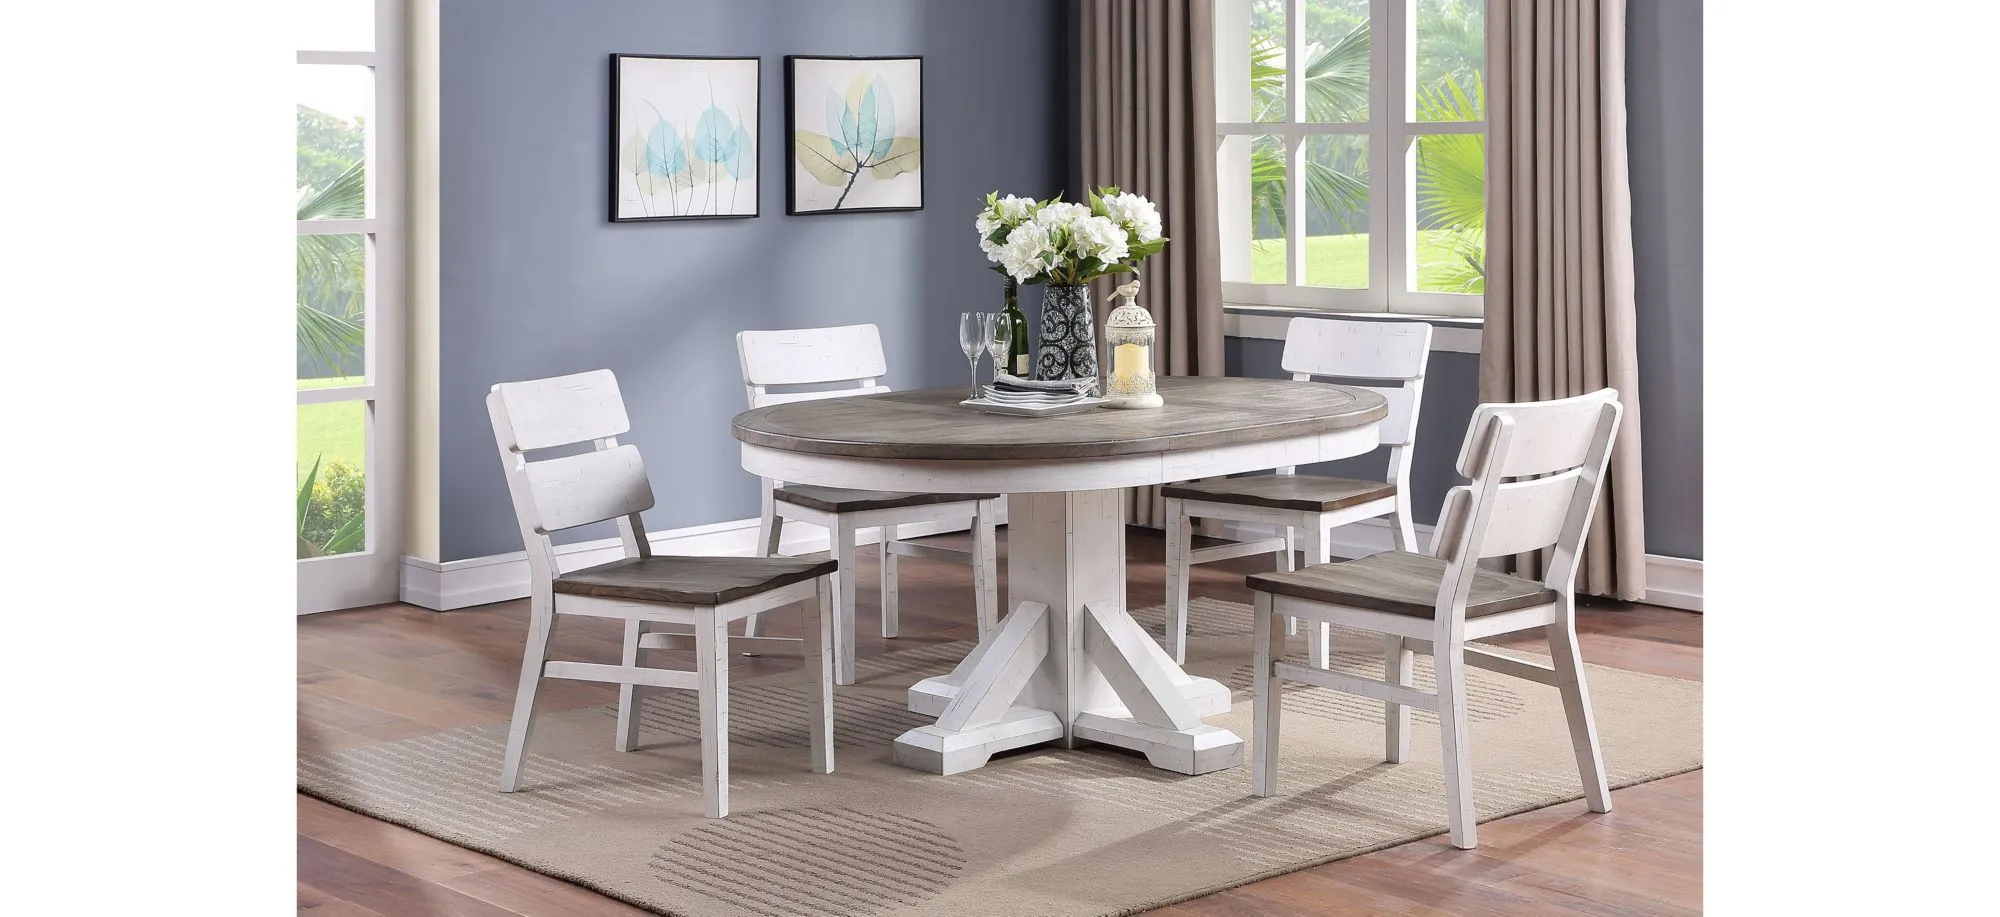 La Sierra 5-pc. Round Dining Table Set in White/Gray by ECI